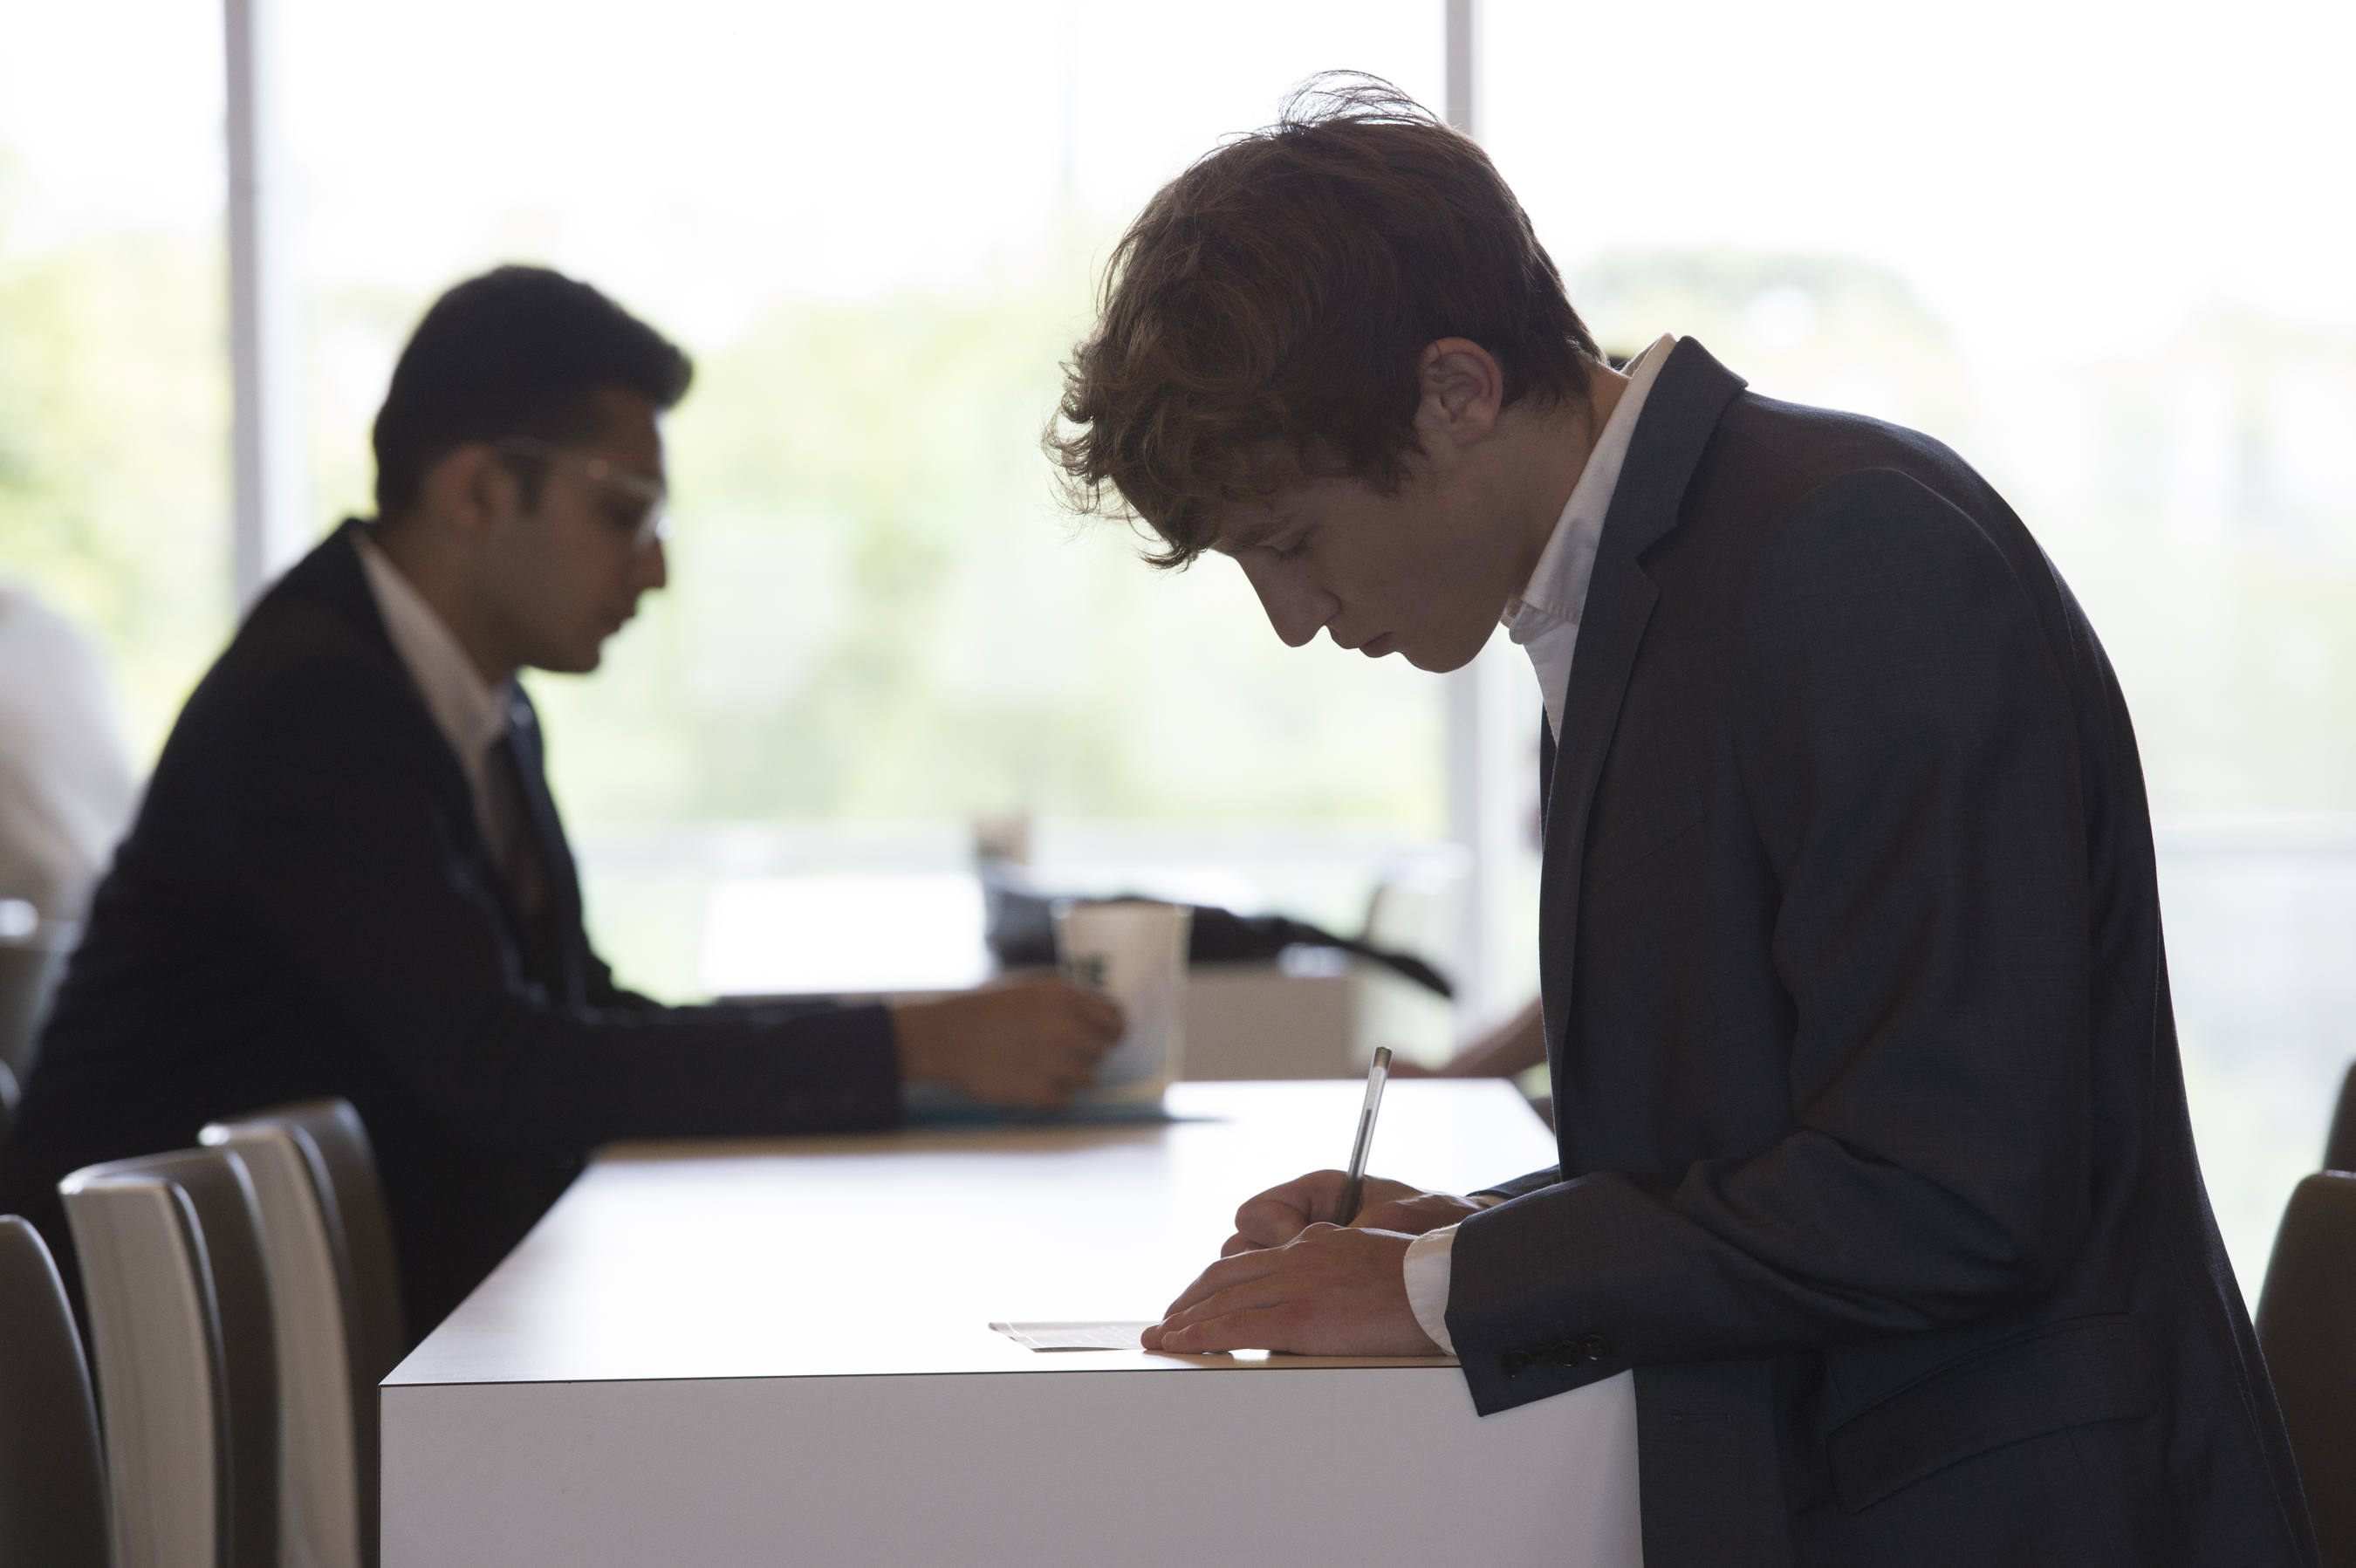 Two students in suits writing notes at a table.